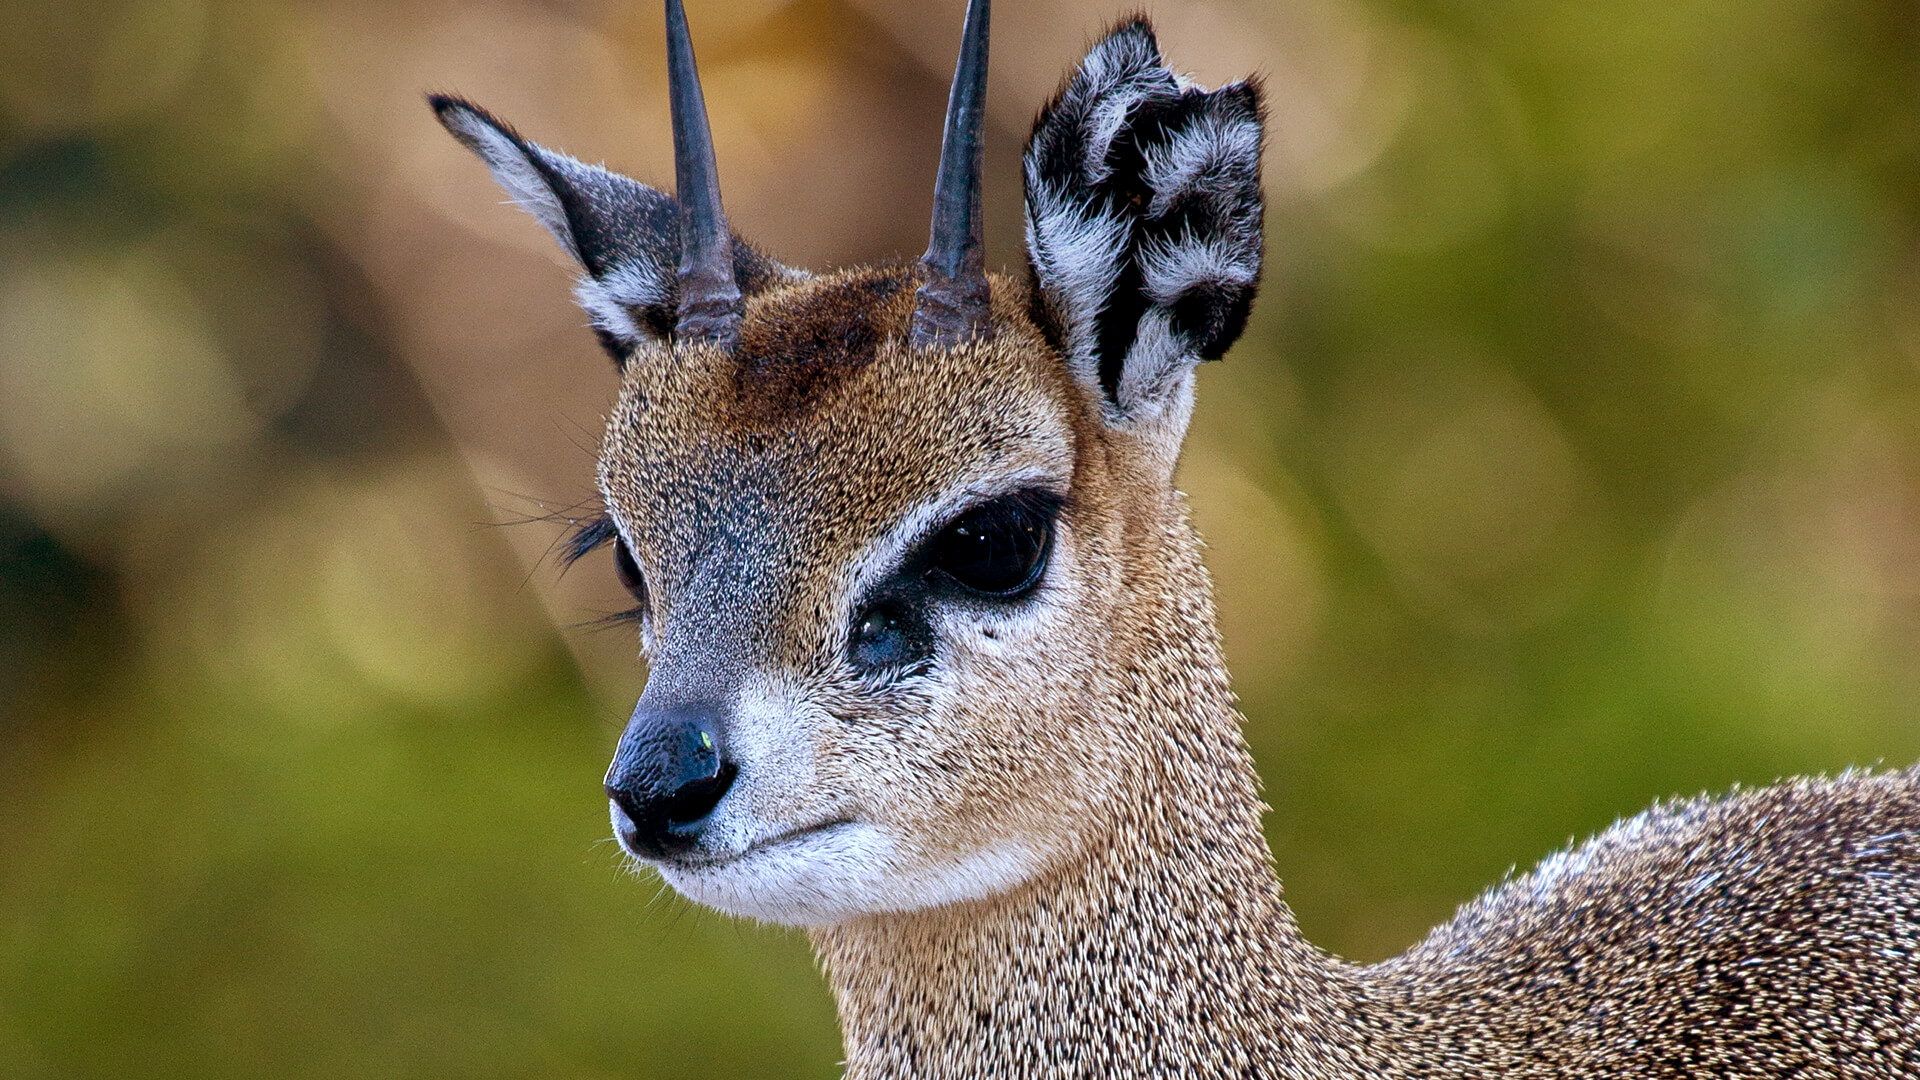 Closeup of a klipspringer's face in front of a green background